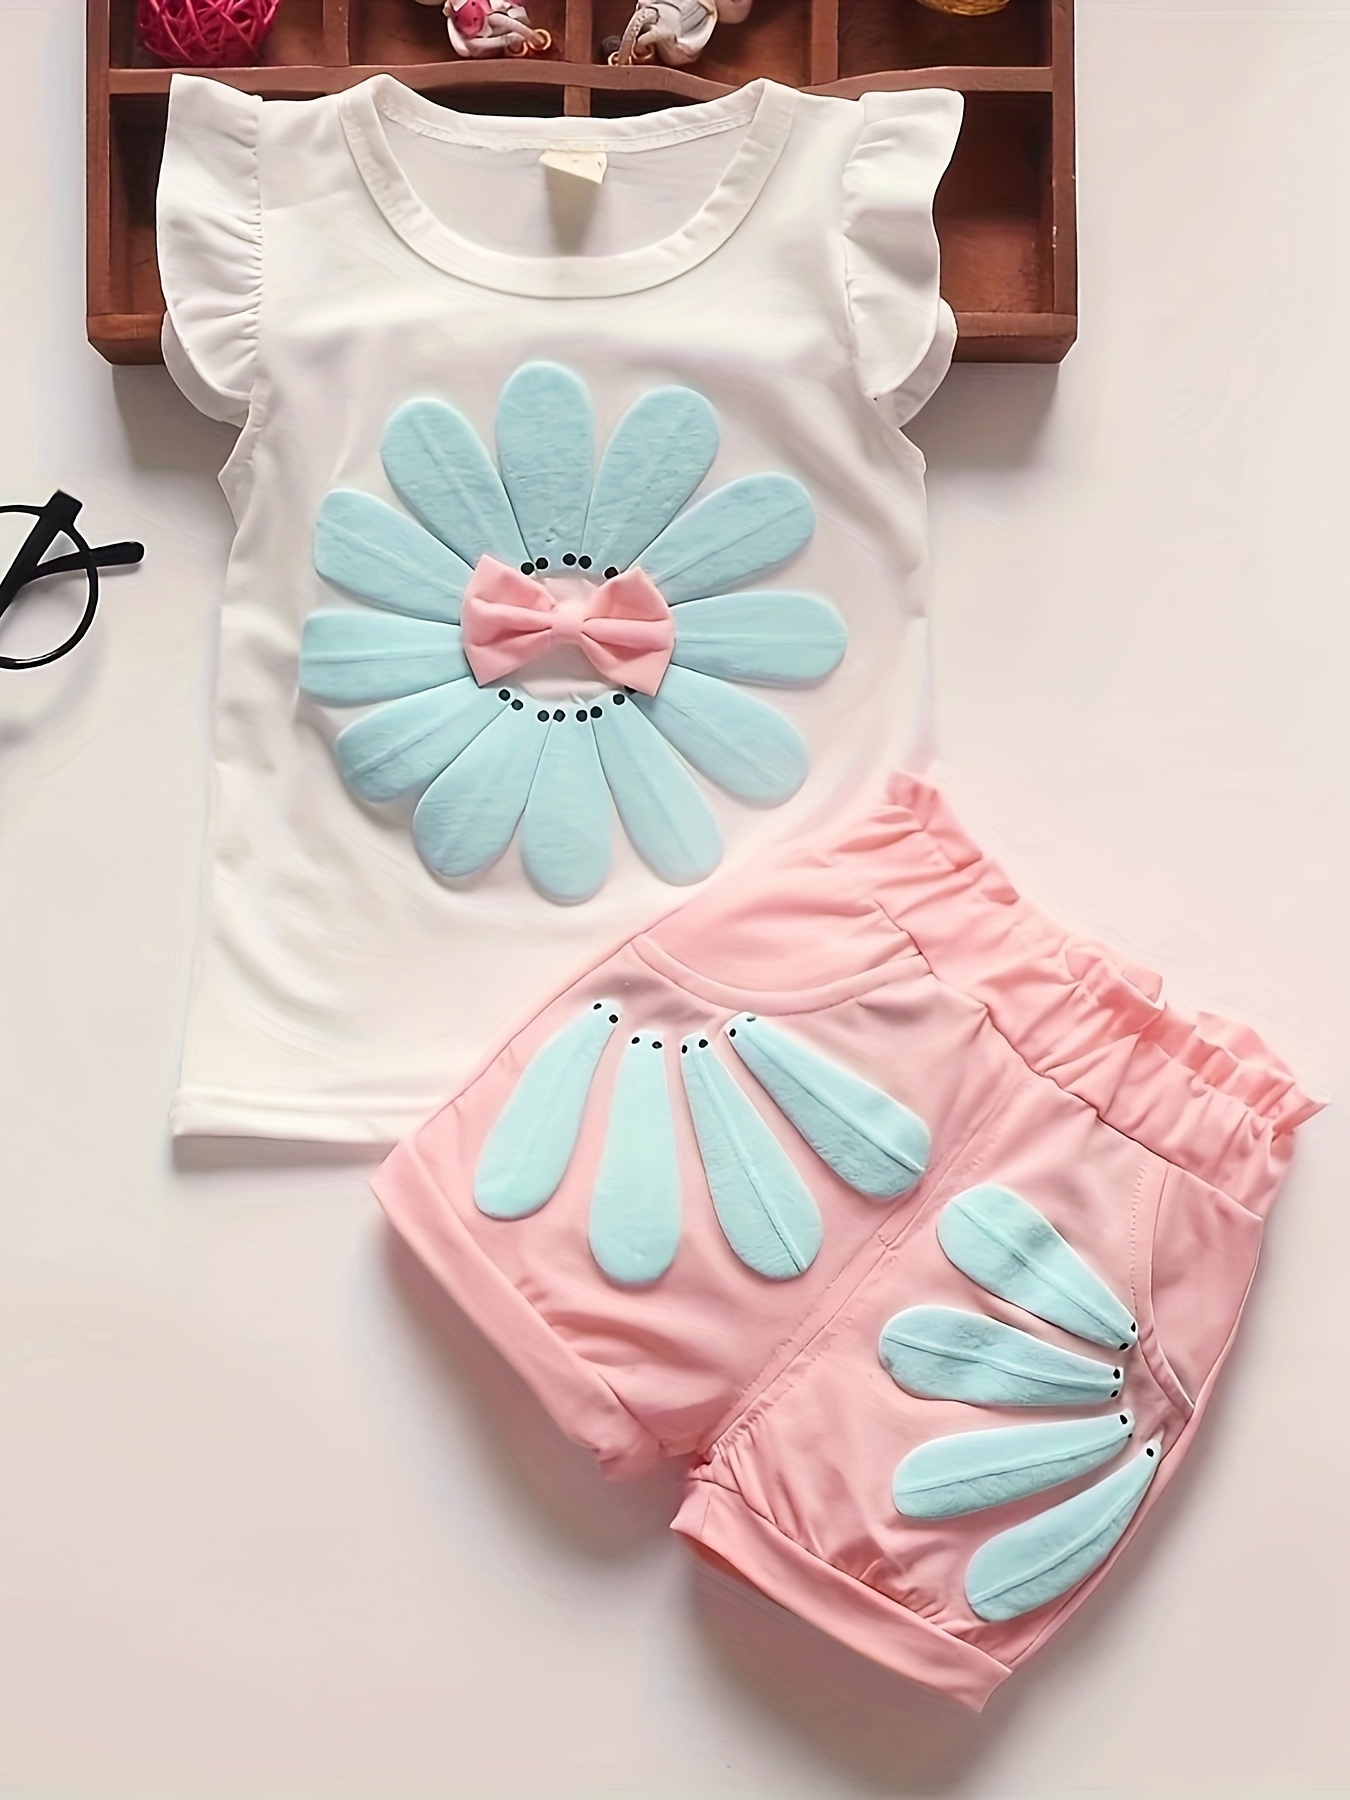 Little Girls Outfit Baby Girl 2 Piece Clothes Set Summer Cotton